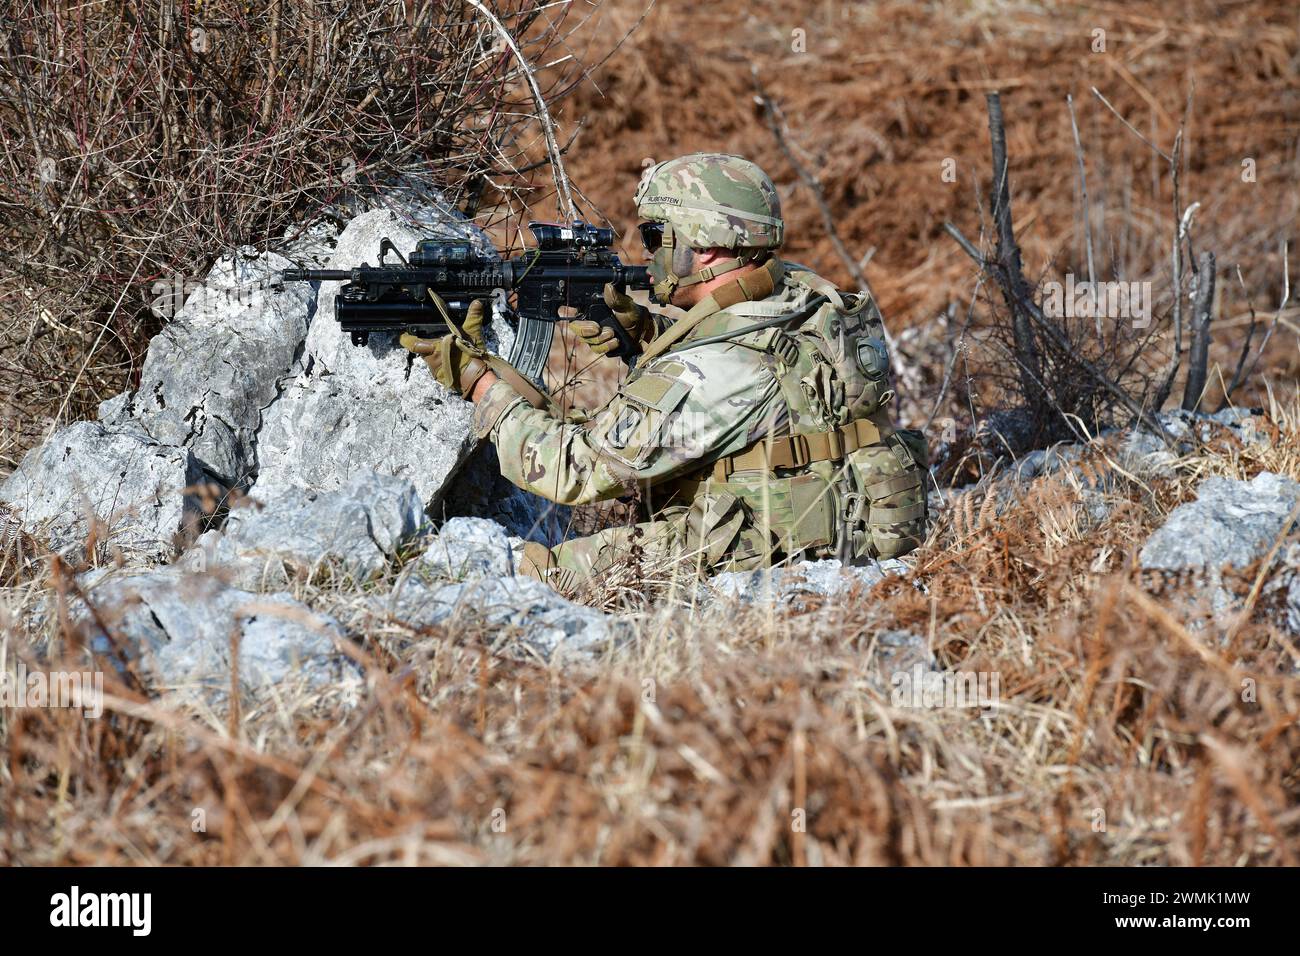 A U.S. Army Paratrooper from the 1st Battalion, 503rd Infantry Regiment, 173rd Airborne Brigade, targets an objective using an M4 rifle during team live-fire and tactical movement training as part of Eagle Ursa at the training range in Slunj, Croatia, on February 25, 2024. The 173rd Airborne Brigade is the U.S. Army's Contingency Response Force in Europe, providing rapidly deployable forces to the United States European, African, and Central Command areas of responsibility. Forward deployed across Italy and Germany, the brigade routinely trains alongside NATO allies and partners to build partn Stock Photo